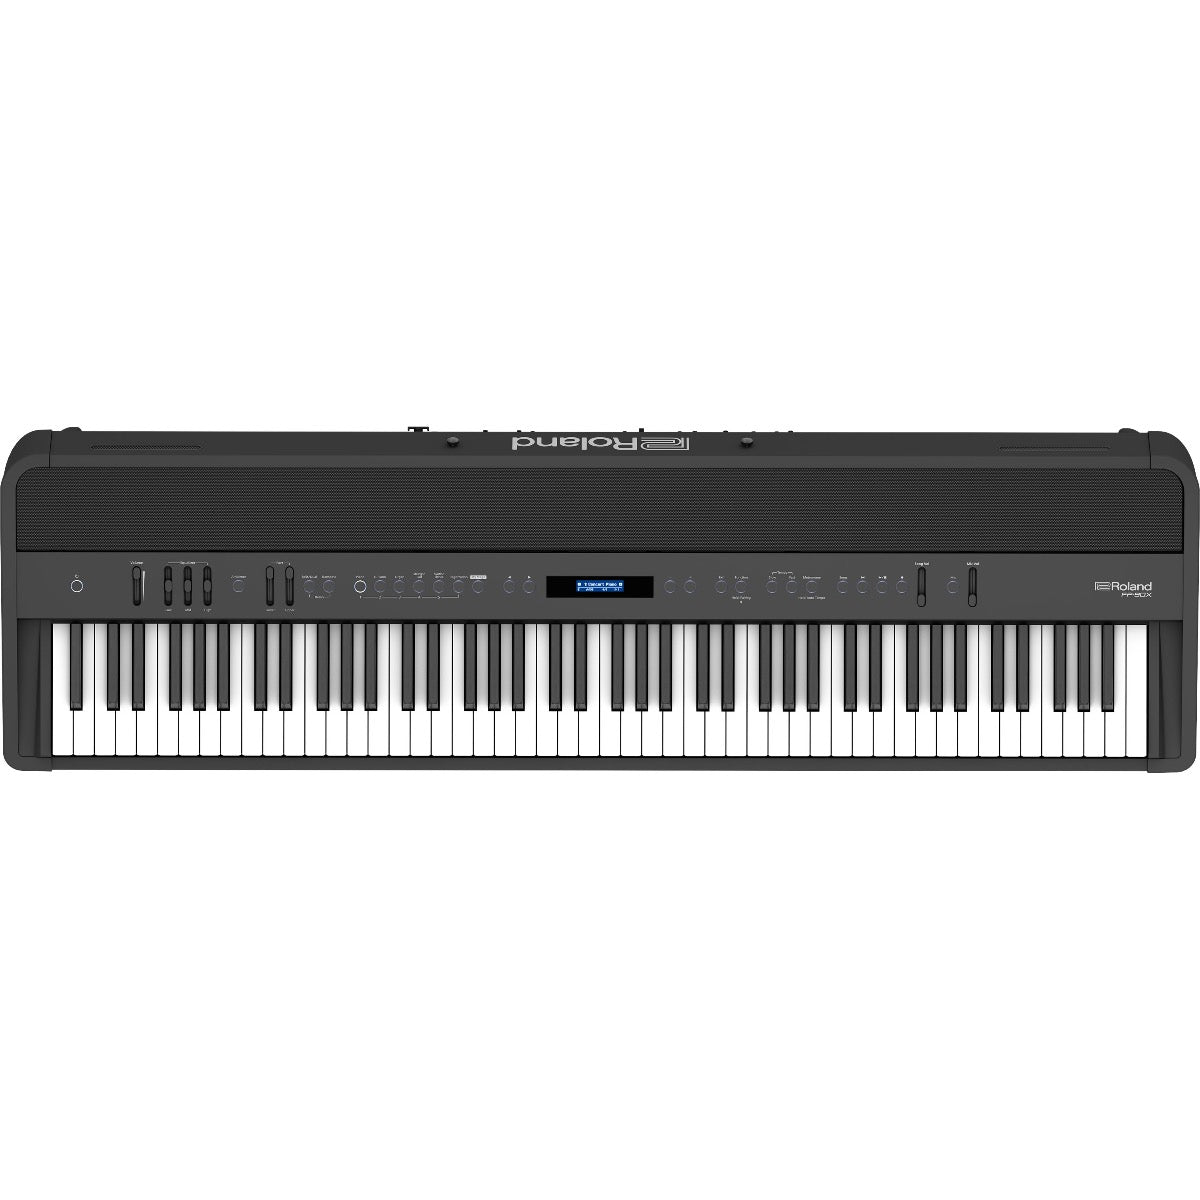 Top view of Roland FP-90X Digital Piano - Black